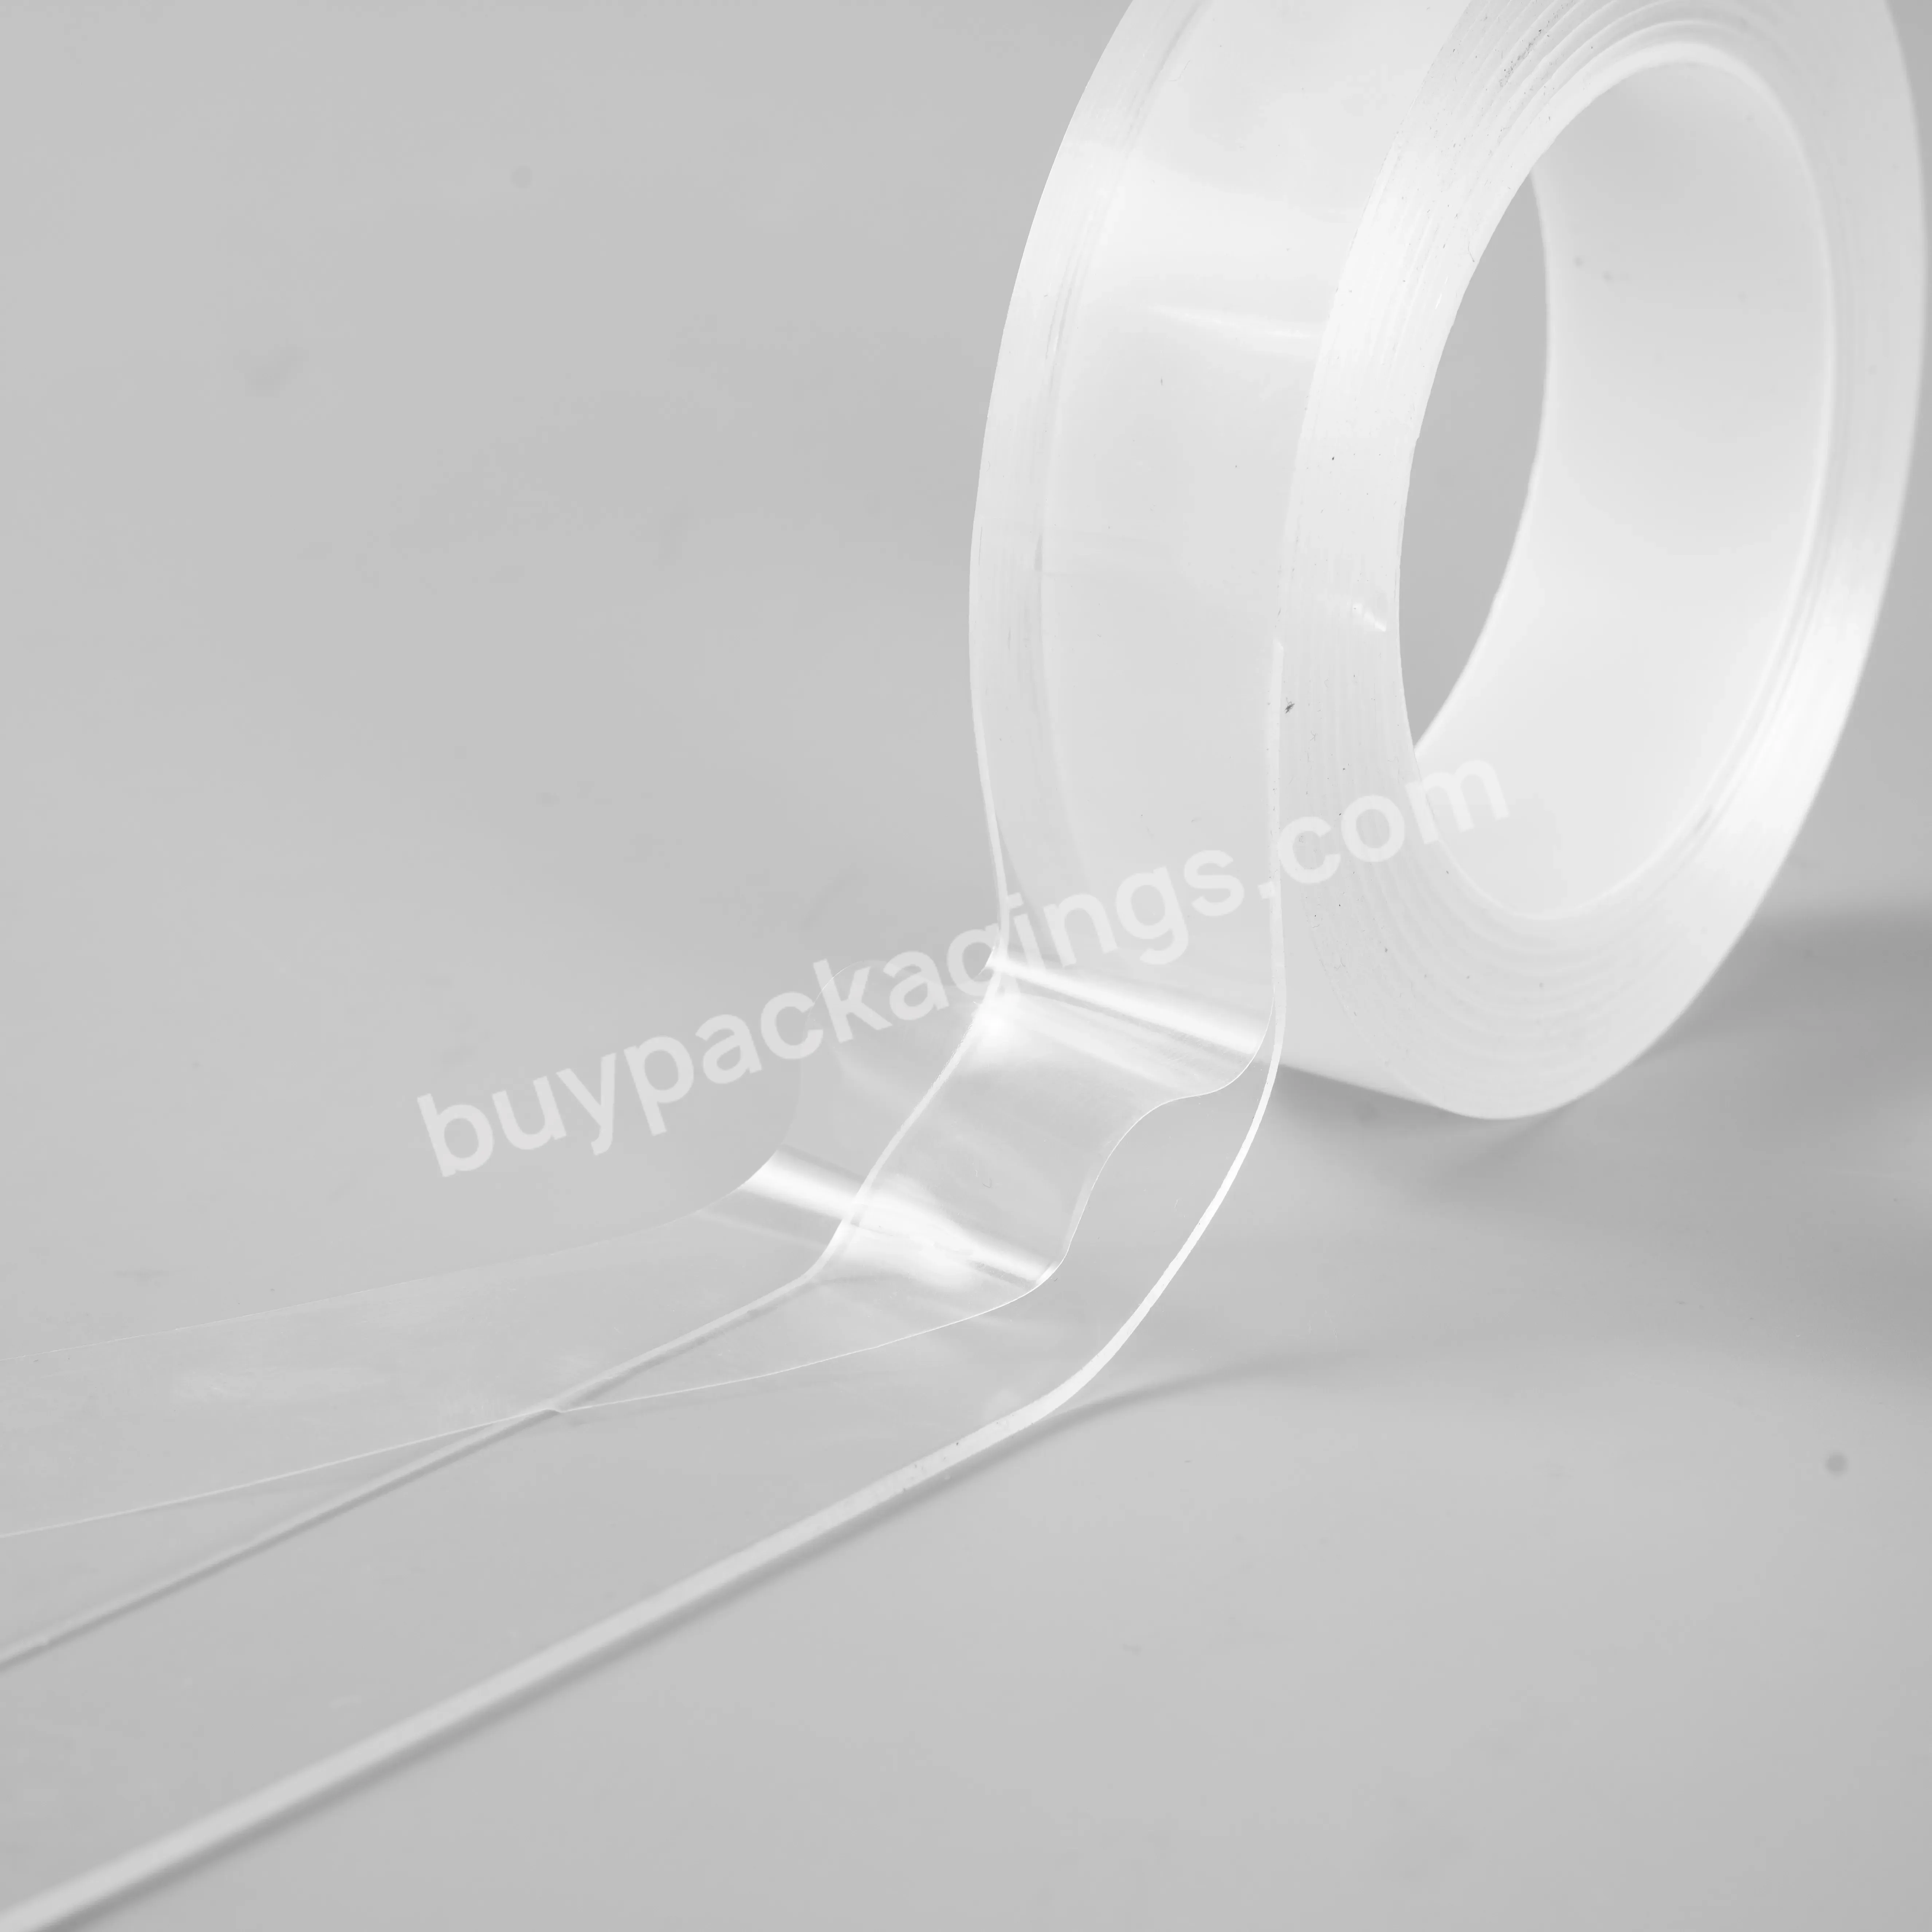 Custom Size White Transparent Trackless Nano Double-sided Tape For Photo Frame Or Fixing Of Ornaments - Buy Nano Tape Clear Non-marking Washable Reusable Household Clear Double Sided Tape,Adhesive Double Sided Tape,Double-sided Nano Tape.